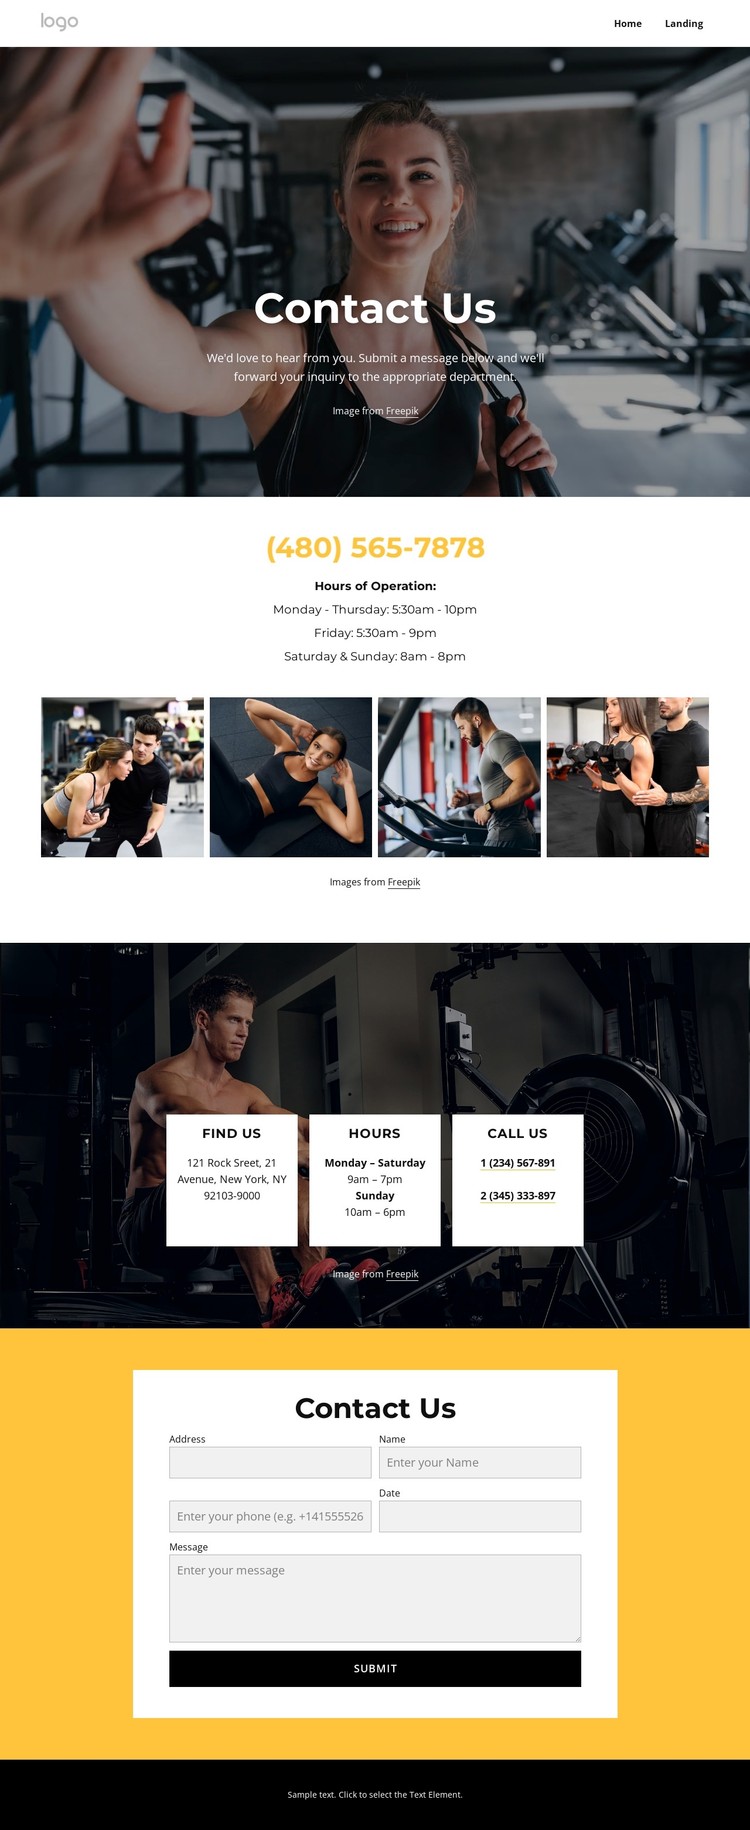 Personal training, group classes Static Site Generator